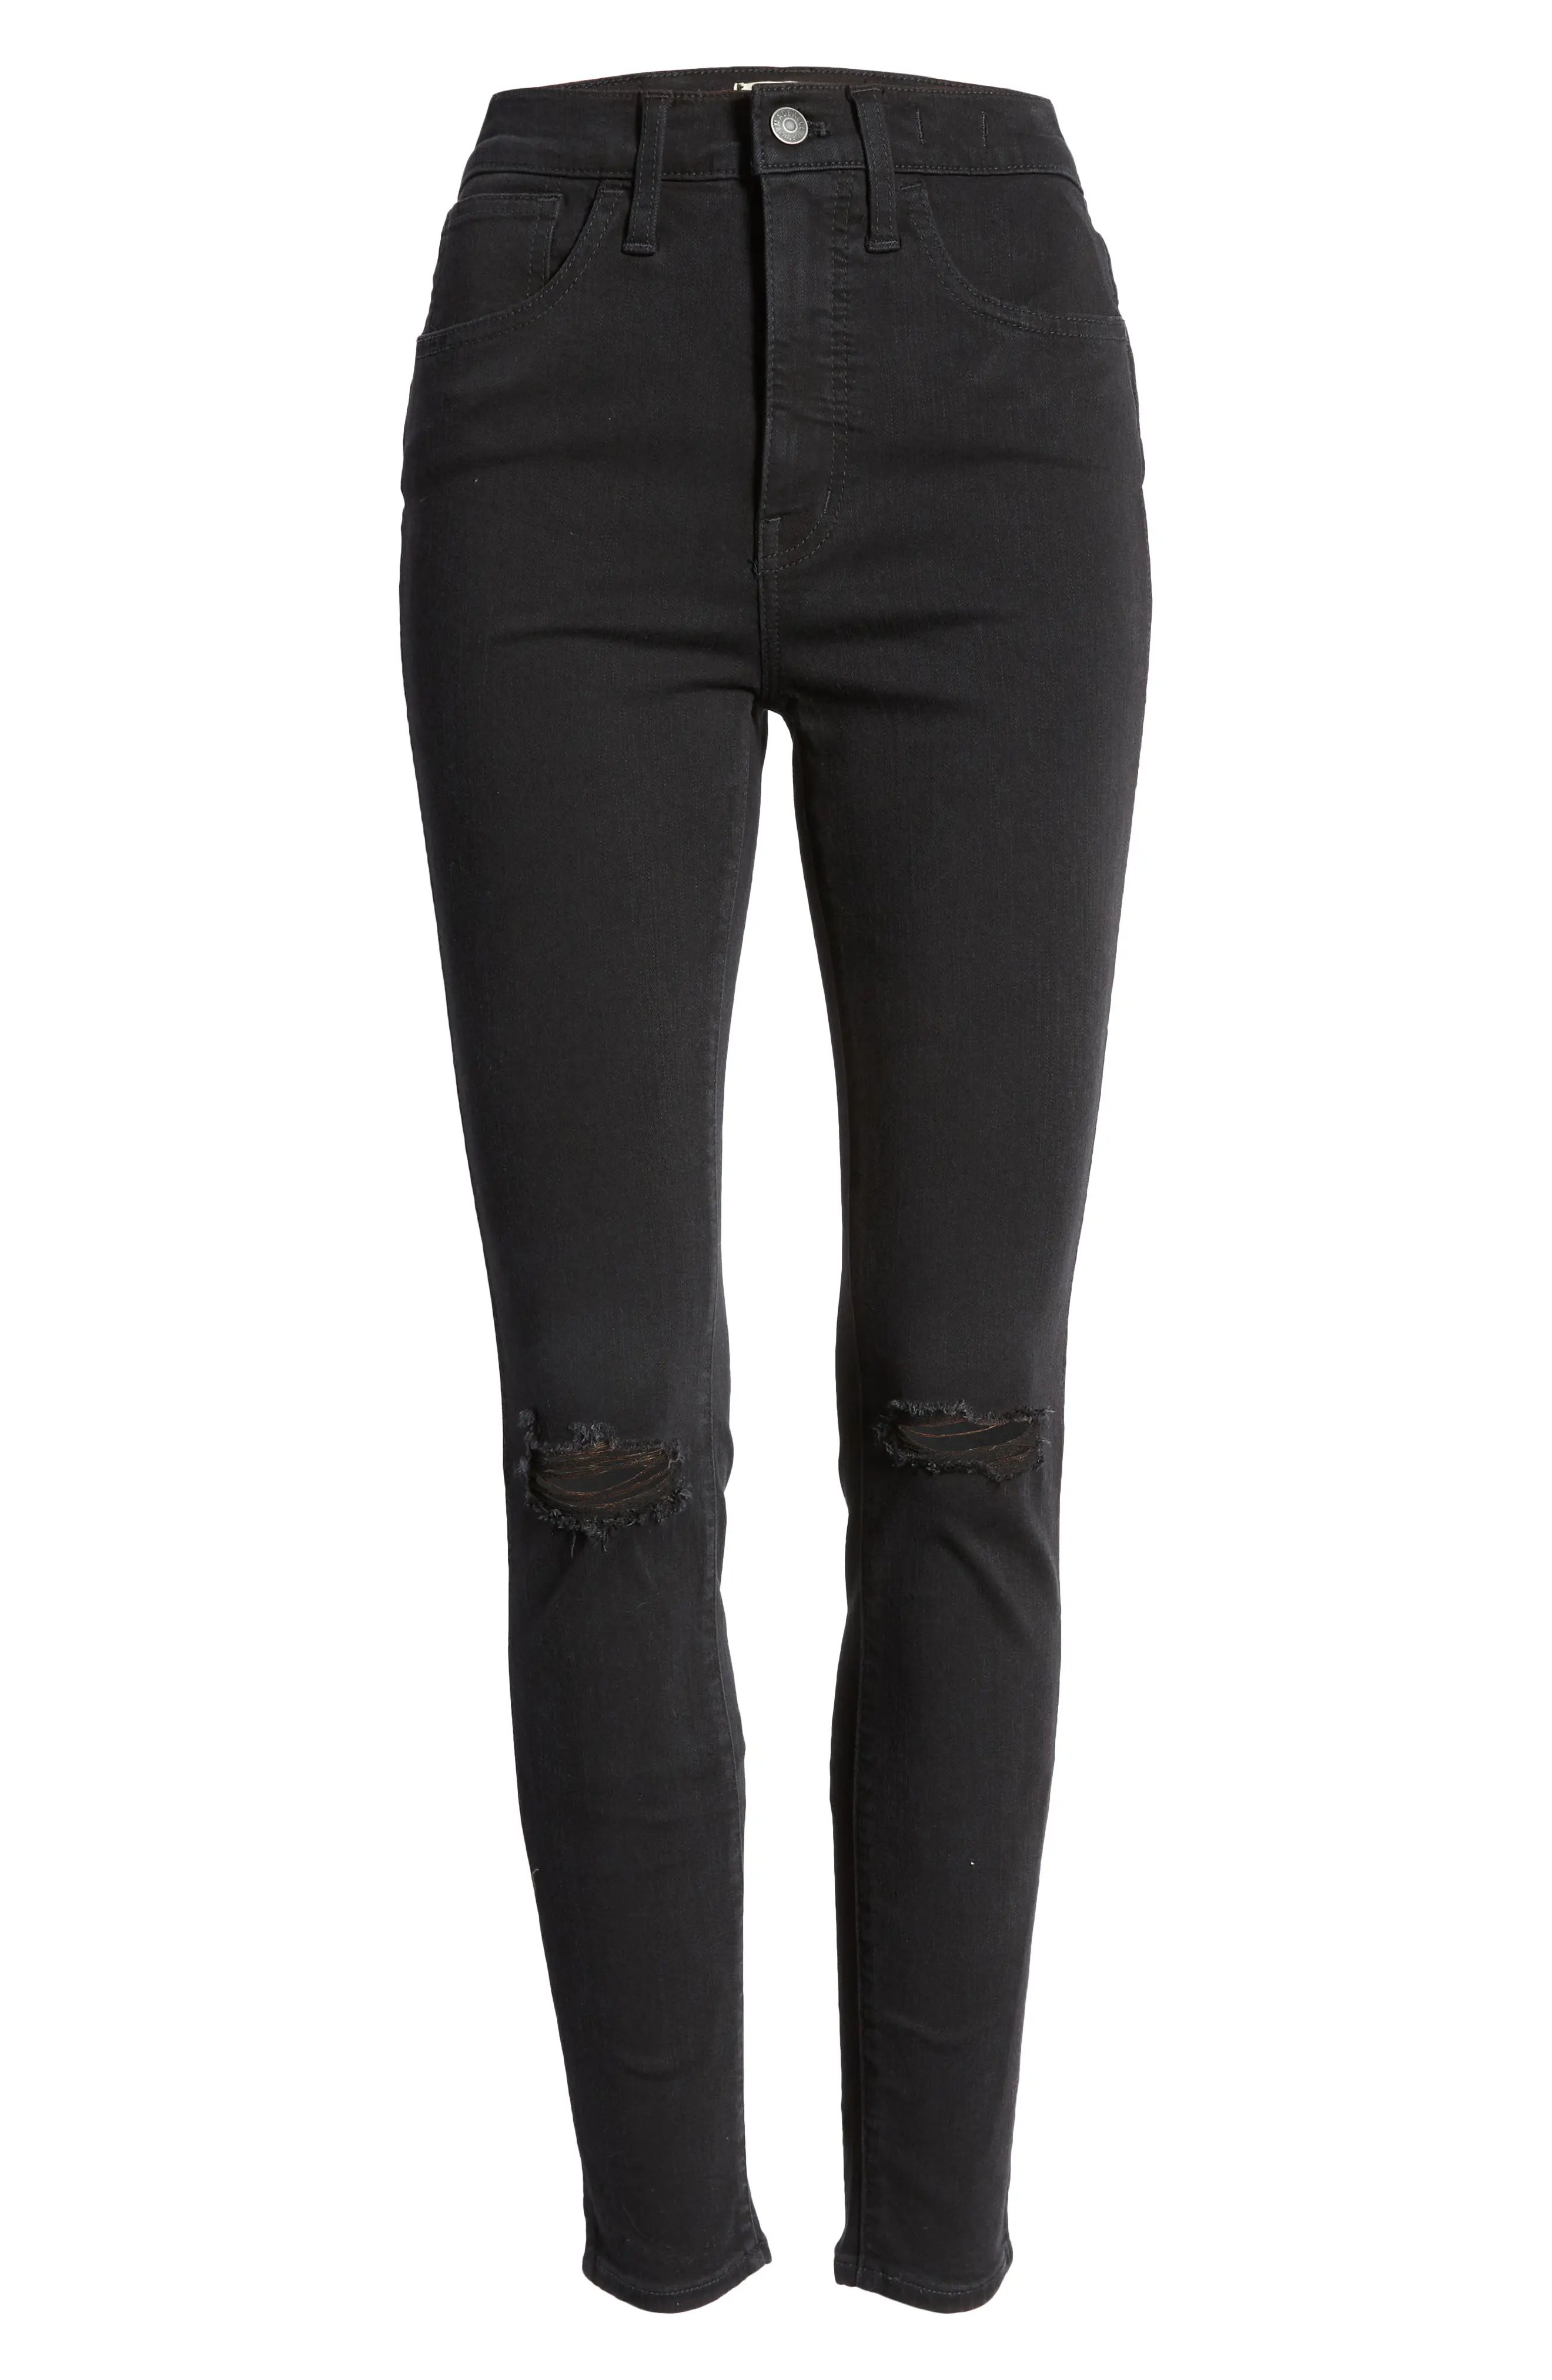 Madewell Roadtripper Ripped High Waist Skinny Jeans, Size 27 in Davie Wash at Nordstrom | Nordstrom